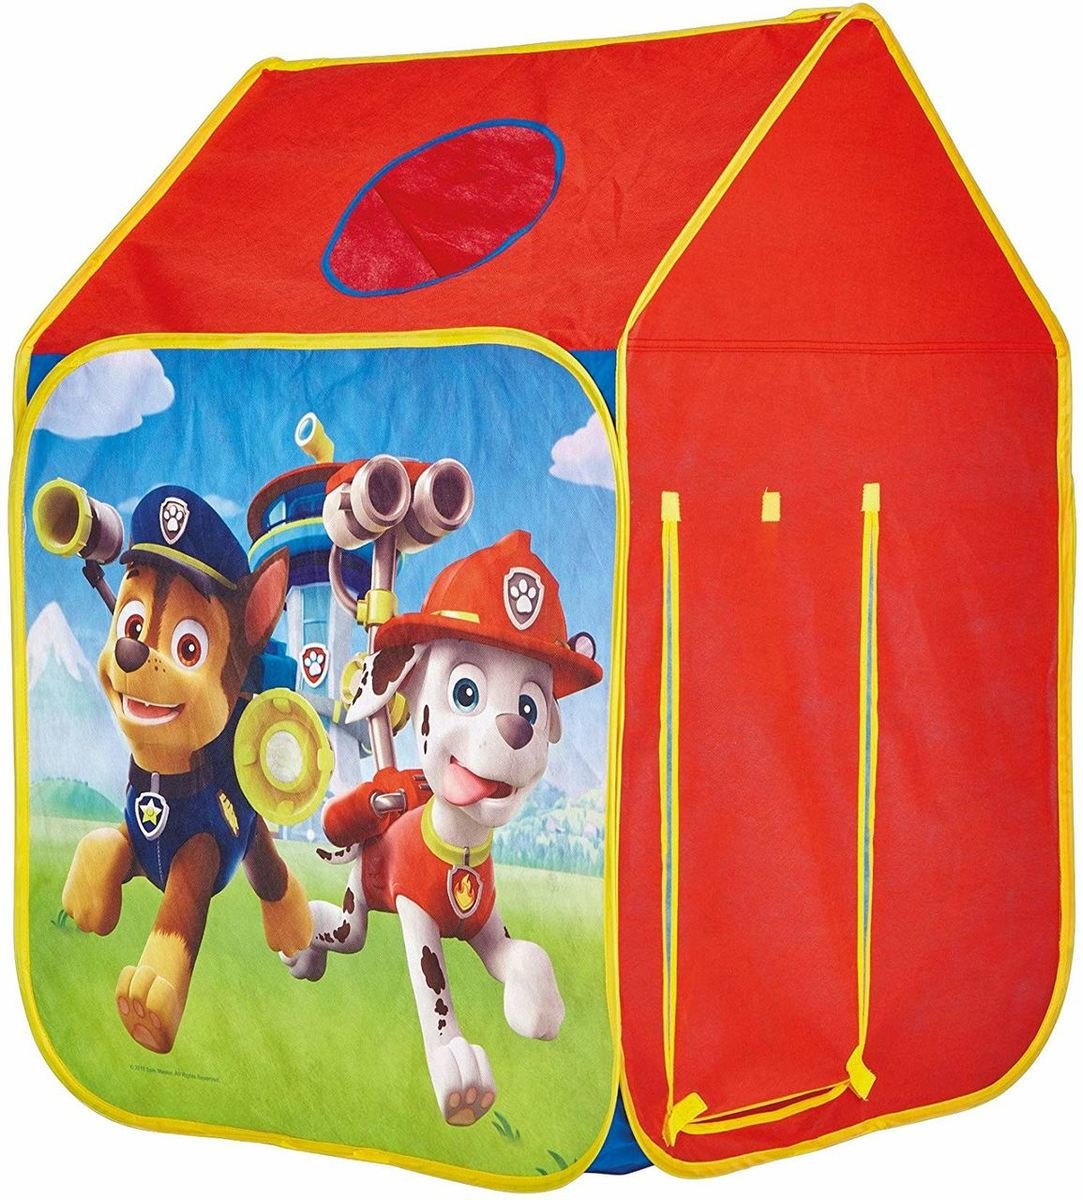 Details about   Paw Patrol Play Tent Toddlers Outdoor Indoor Boys Girls Kids Yard Garden New 